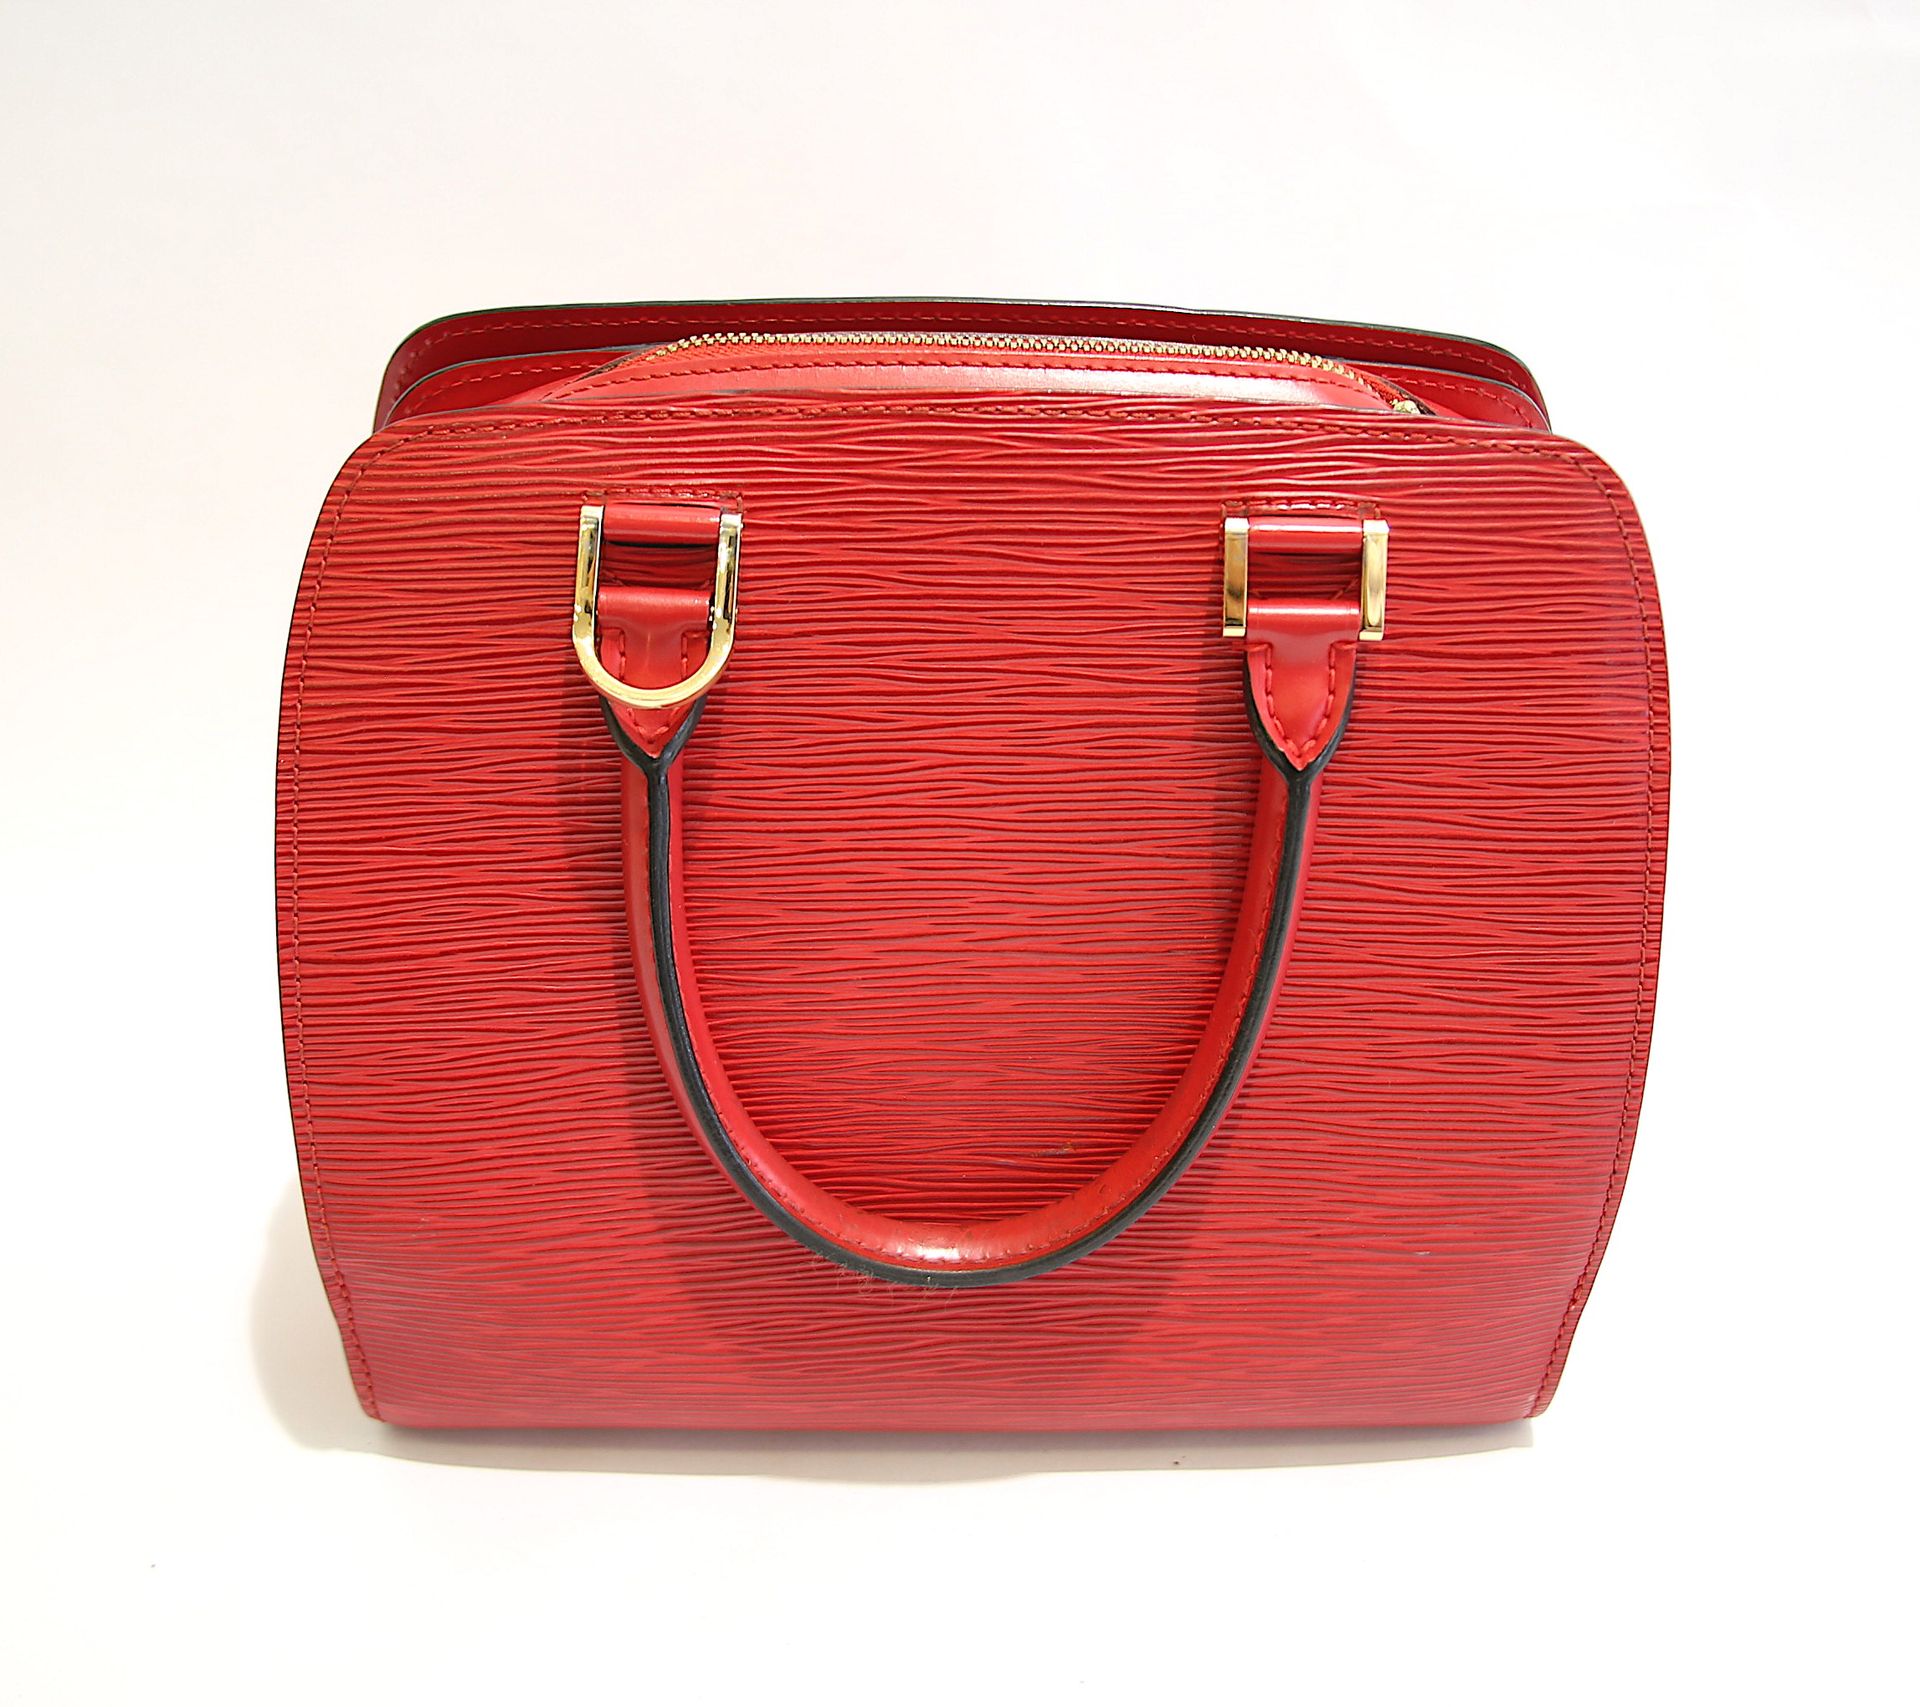 Louis VUITTON bag type Pont neuf red, new condition